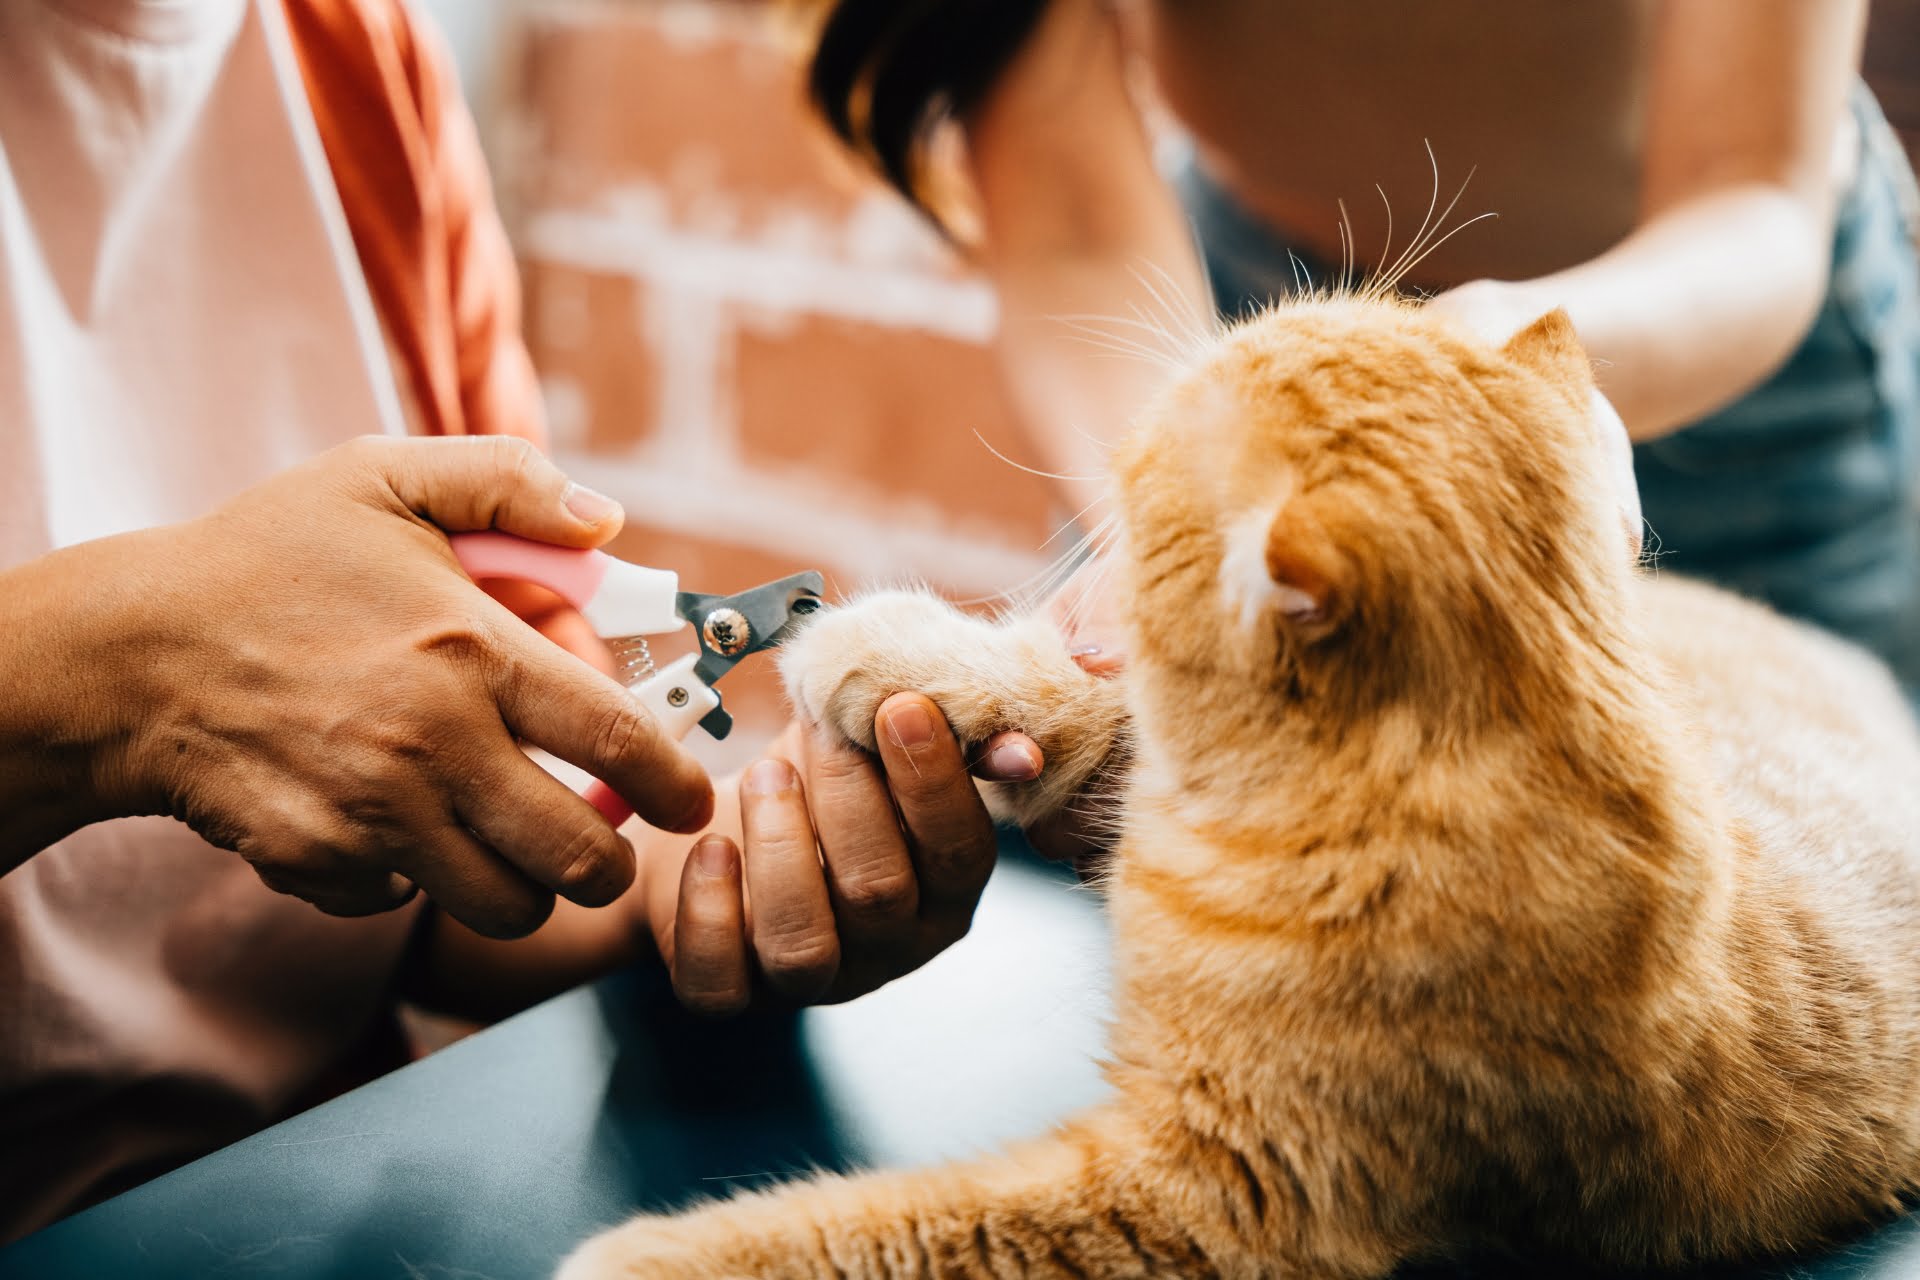 How to Trim a Cat’s Nails That Won’t Let You